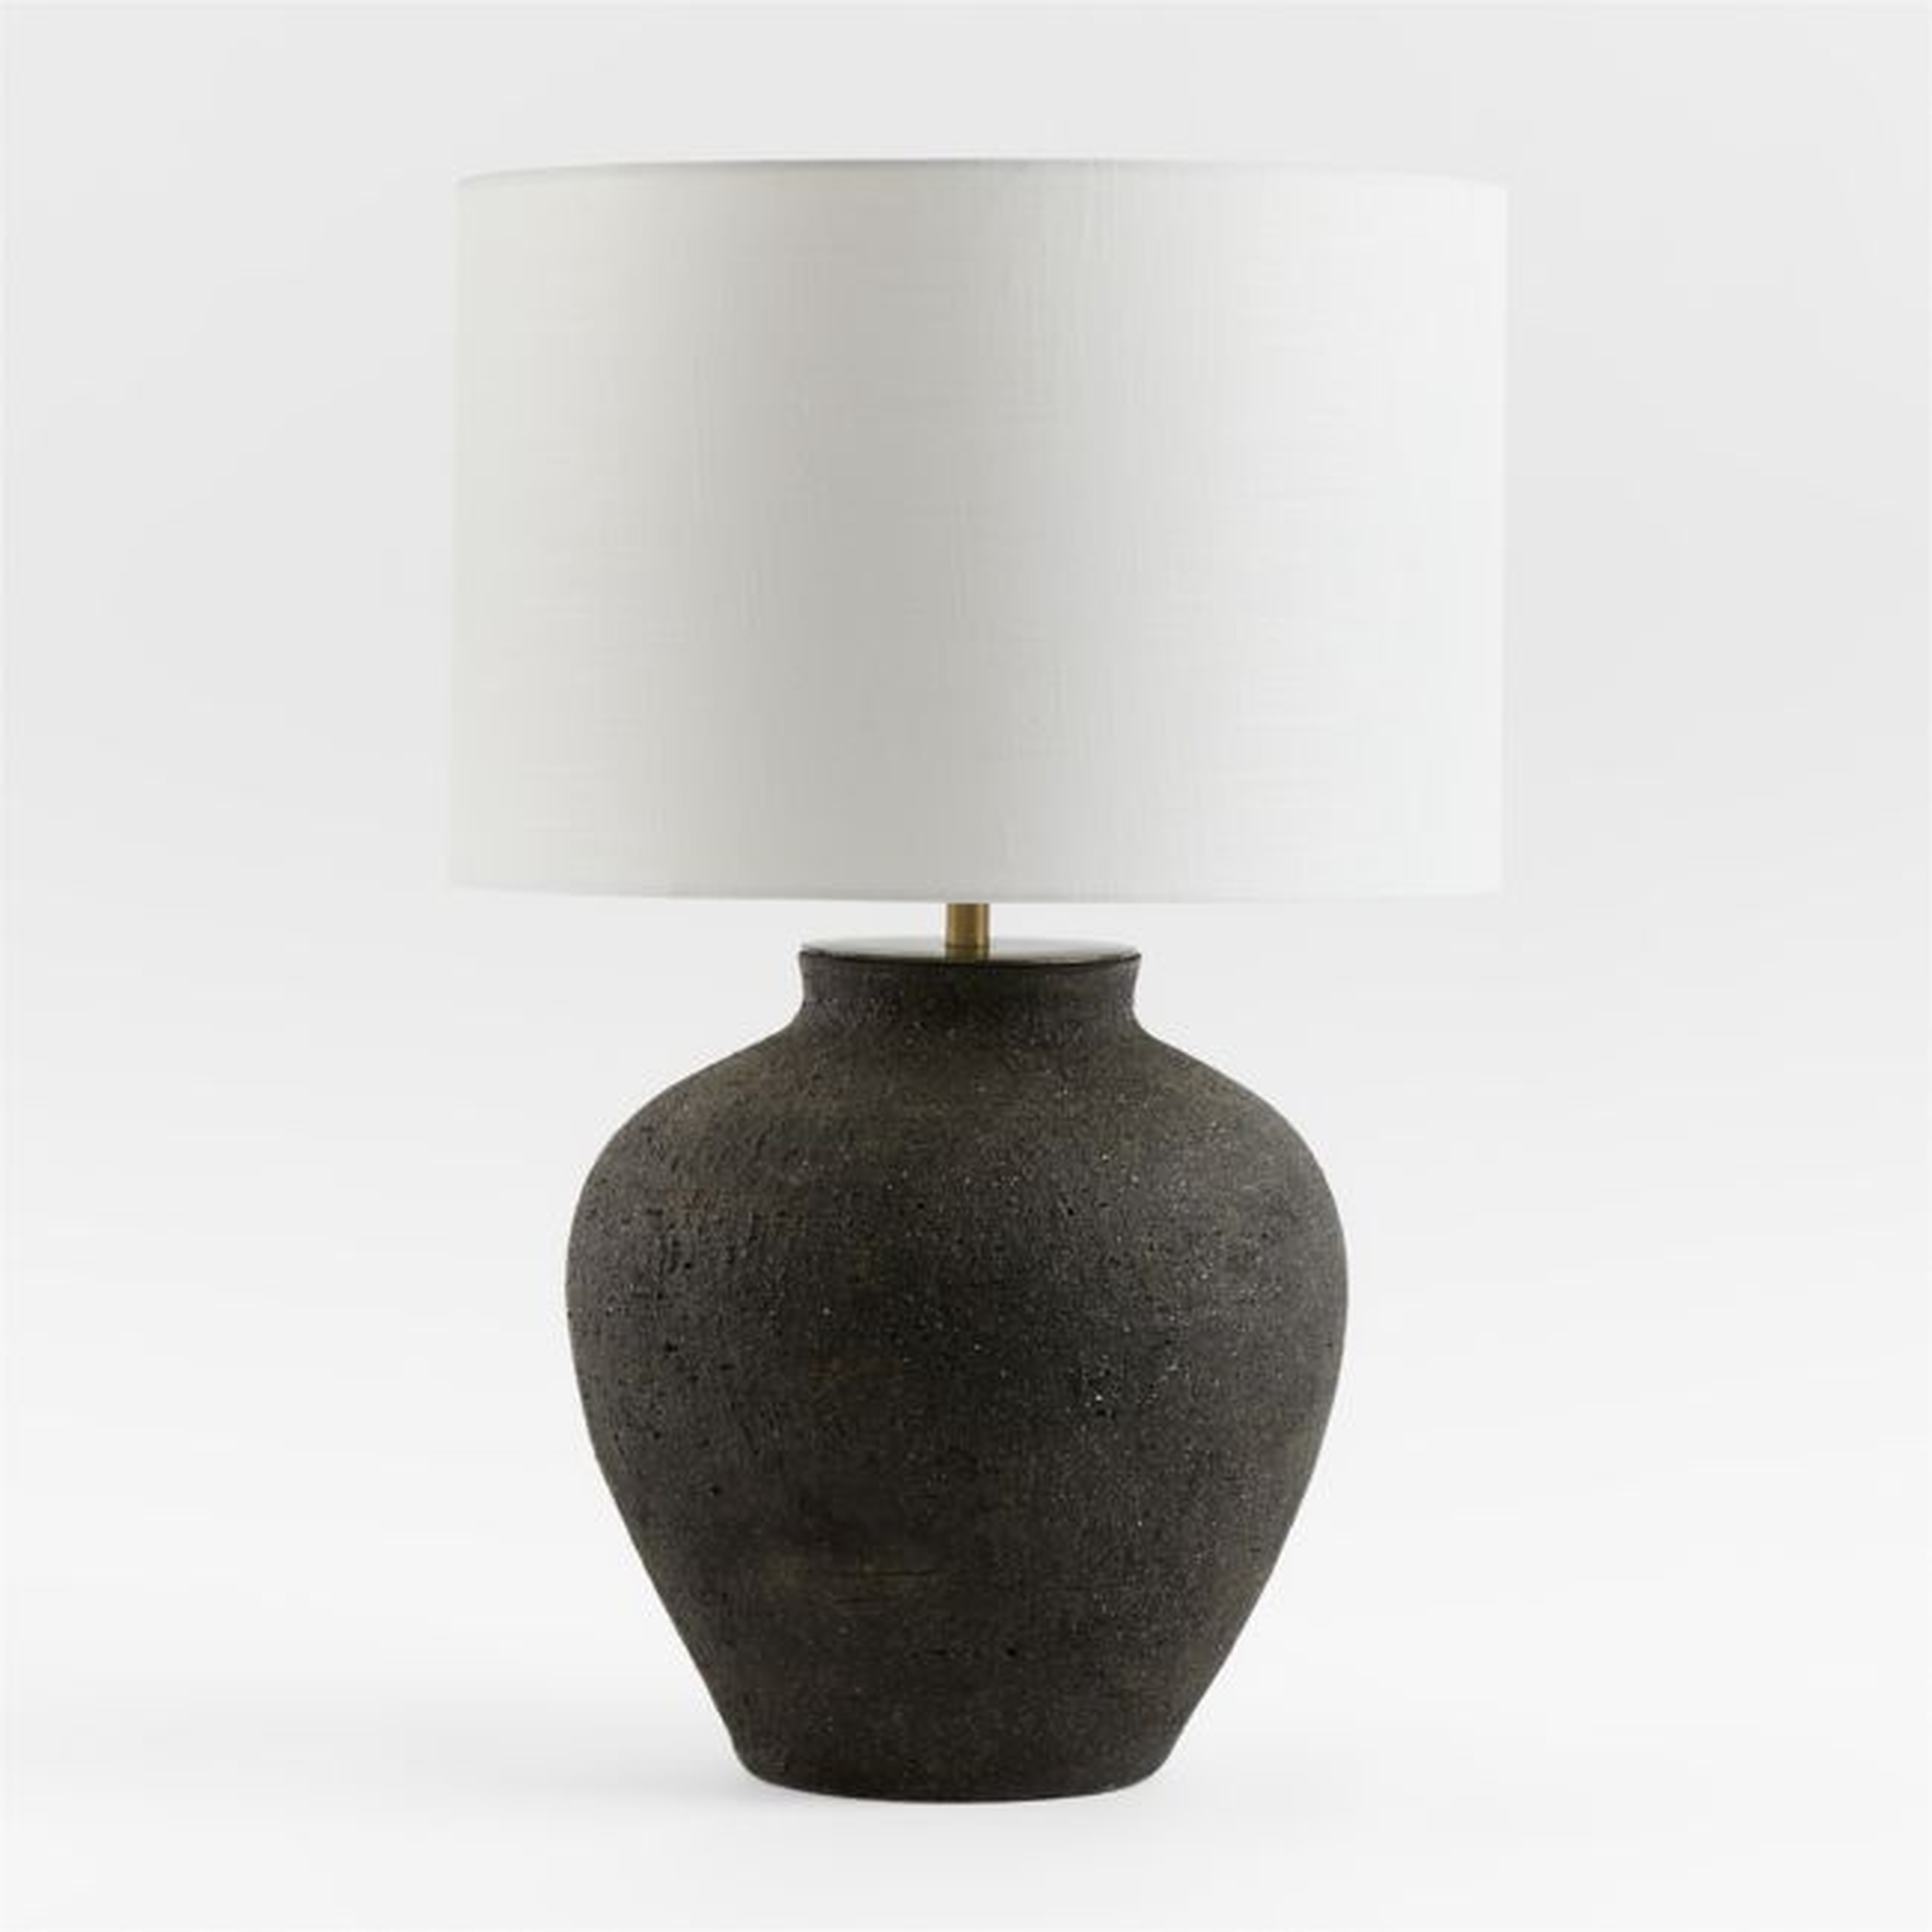 Corfu Black Table Lamp with Linen Drum Shade - Crate and Barrel